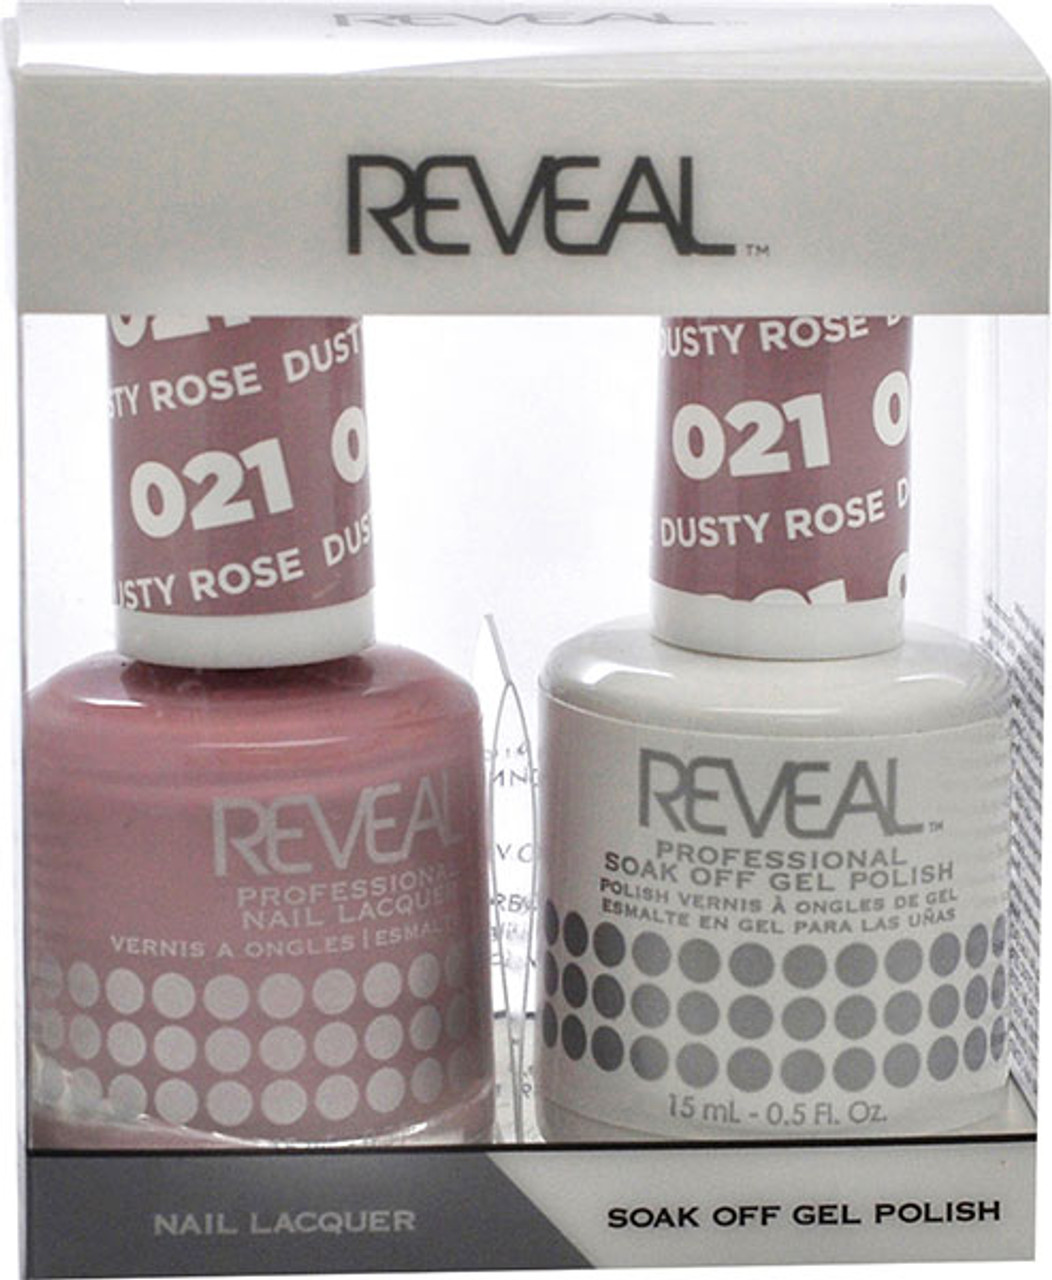 Reveal Gel Polish & Nail Lacquer Matching Duo - DUSTY ROSE - .5 oz